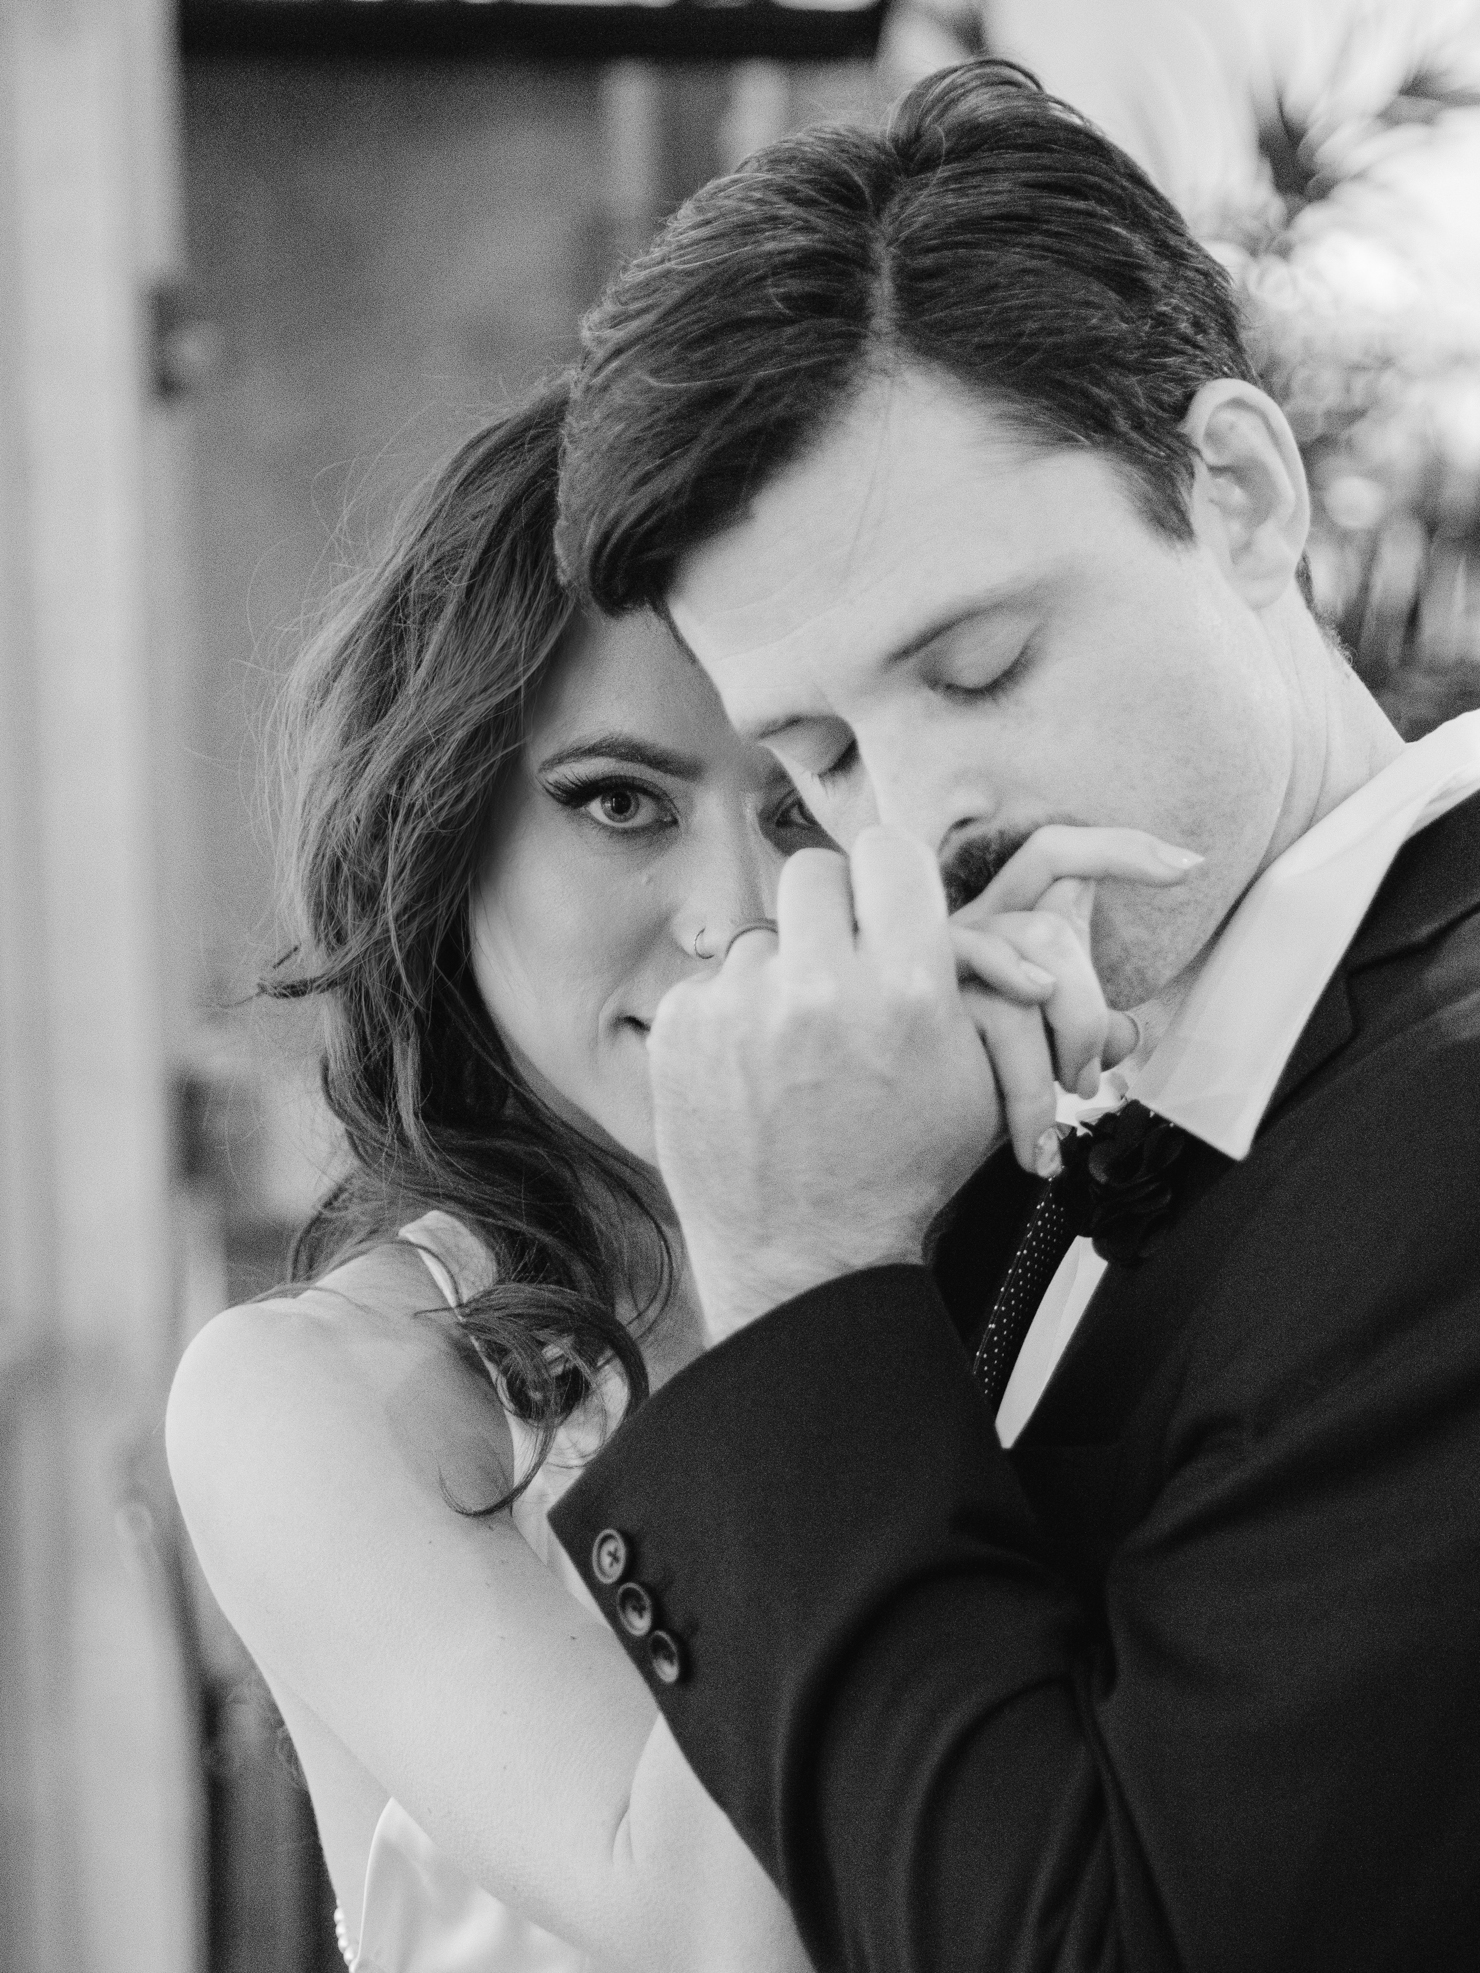 Close up black and white Virginia Beach engagement photography of a groom kissing bride's hand and her looking strait into the camera